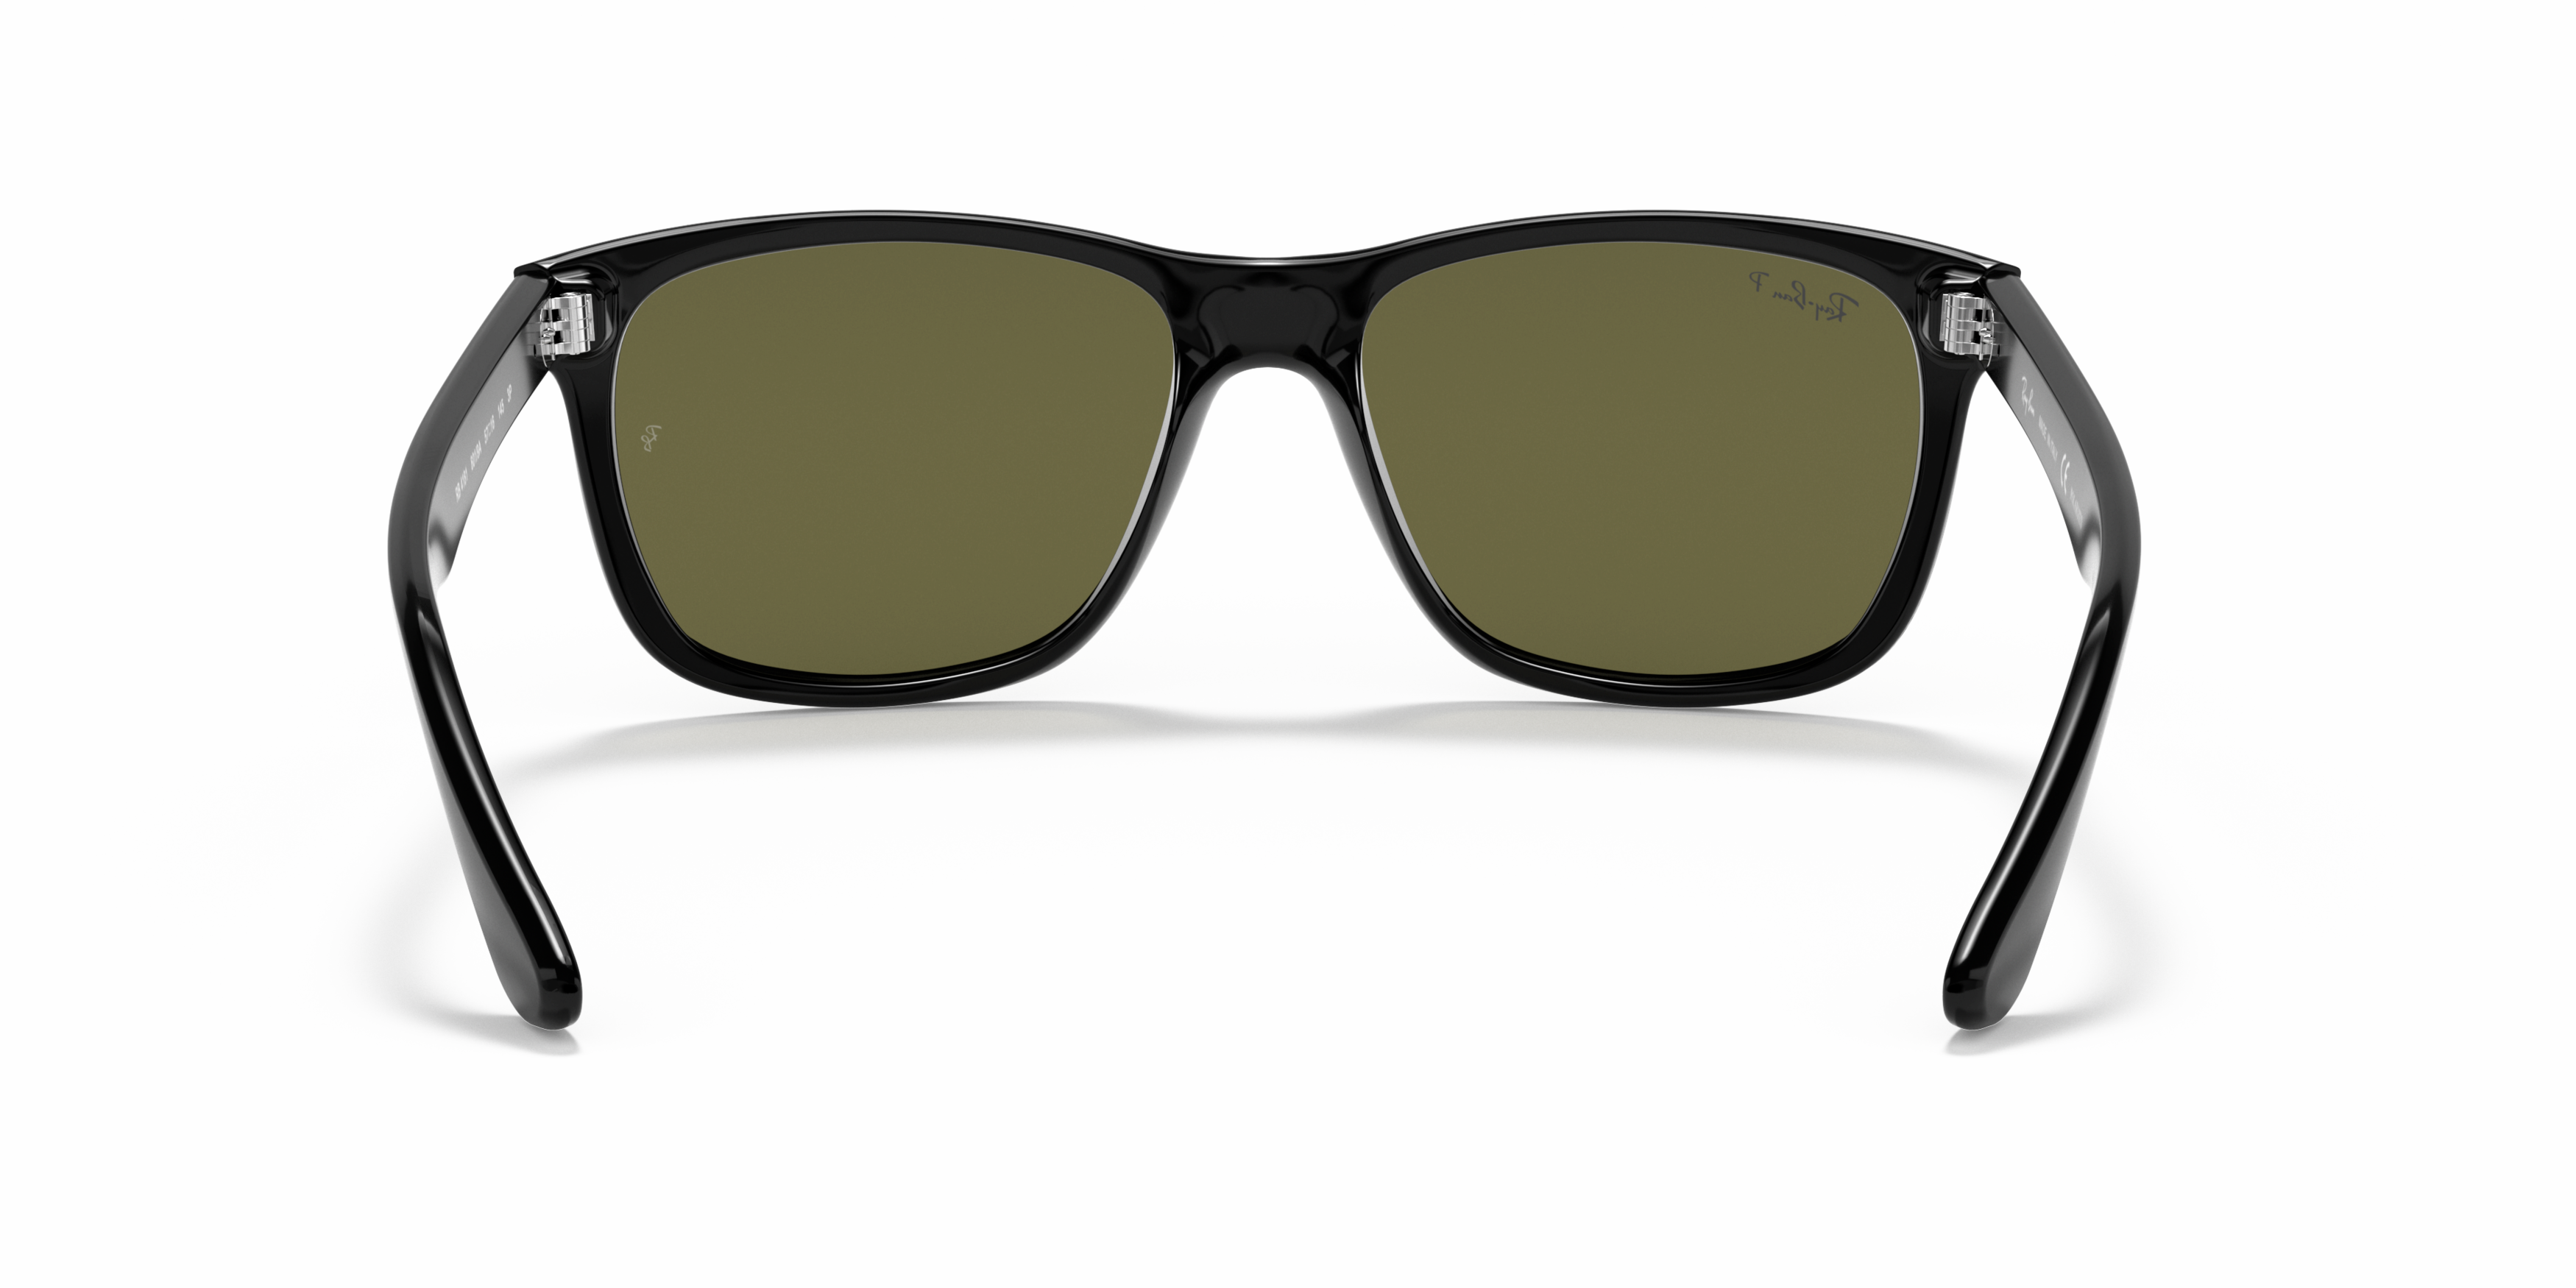 Detail02 Ray-Ban 0RB4181 601/9A Verde / Negro